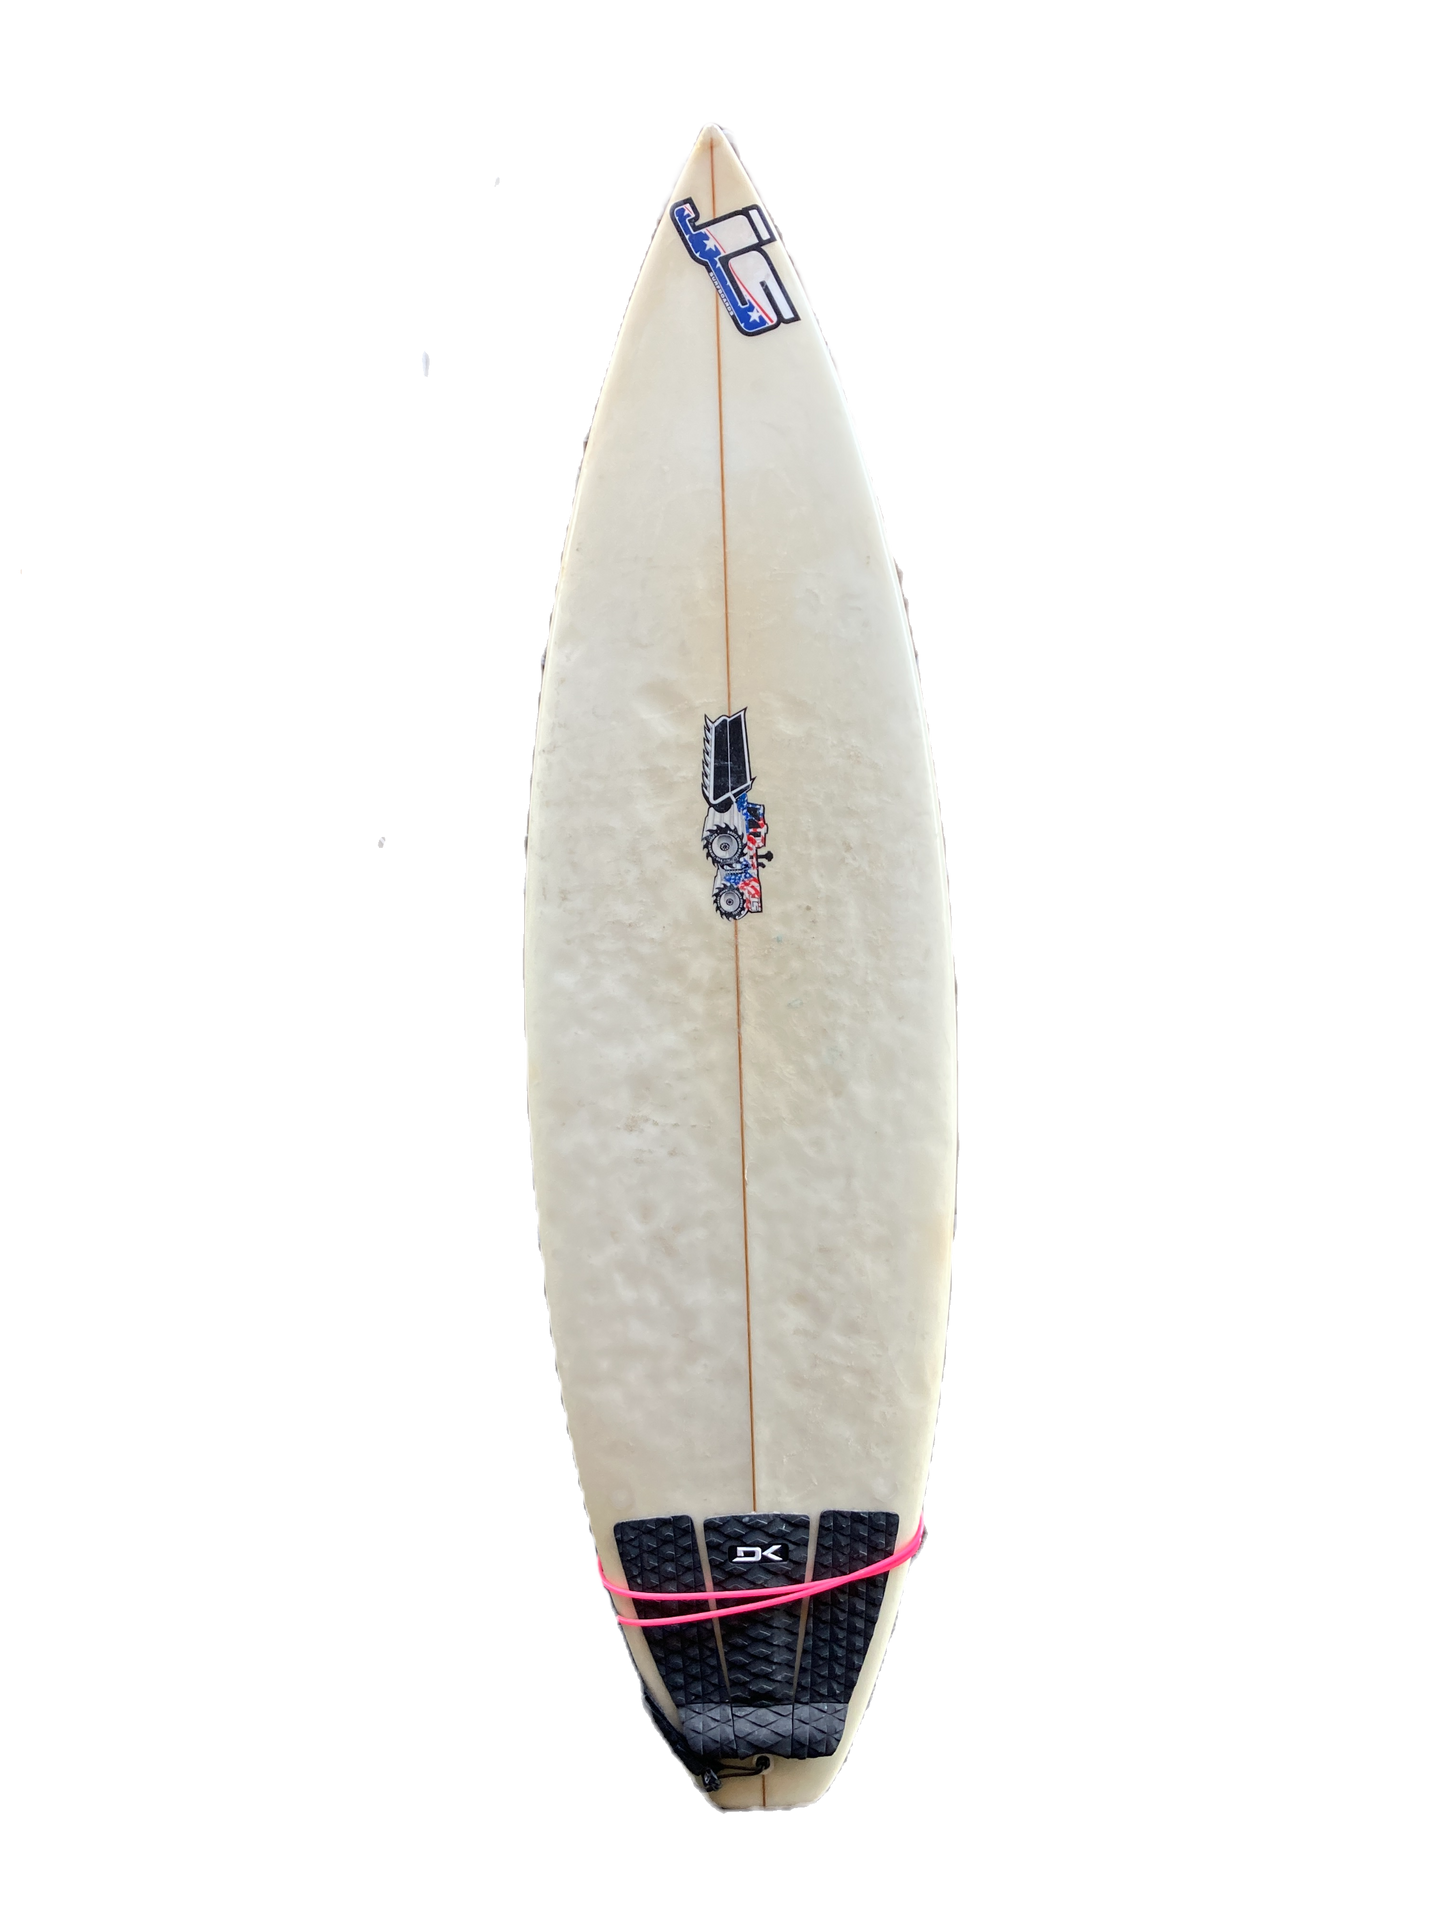 USED: JS Bruce Irons Board